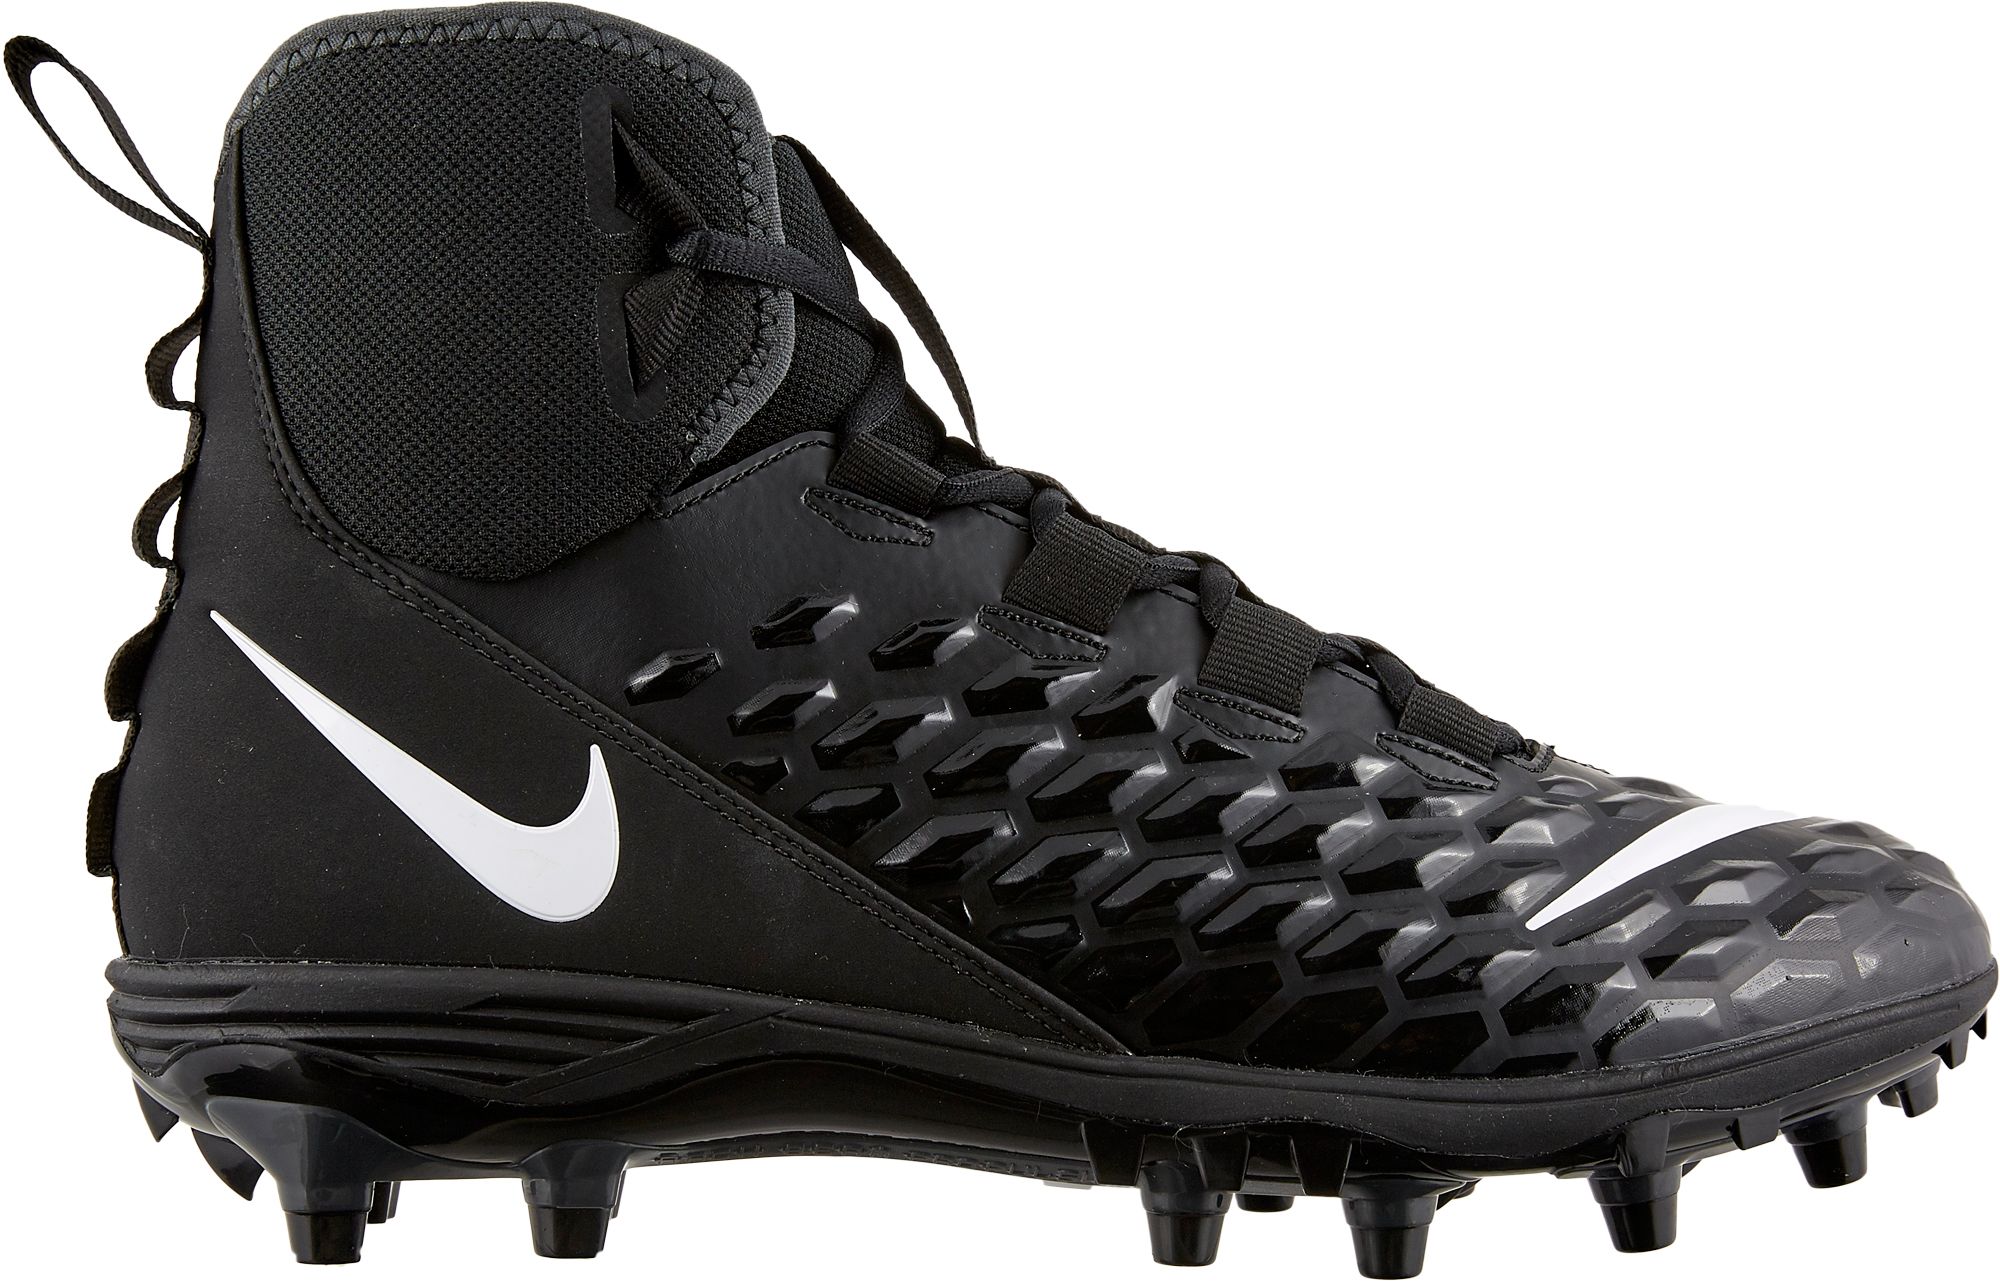 savage force cleats